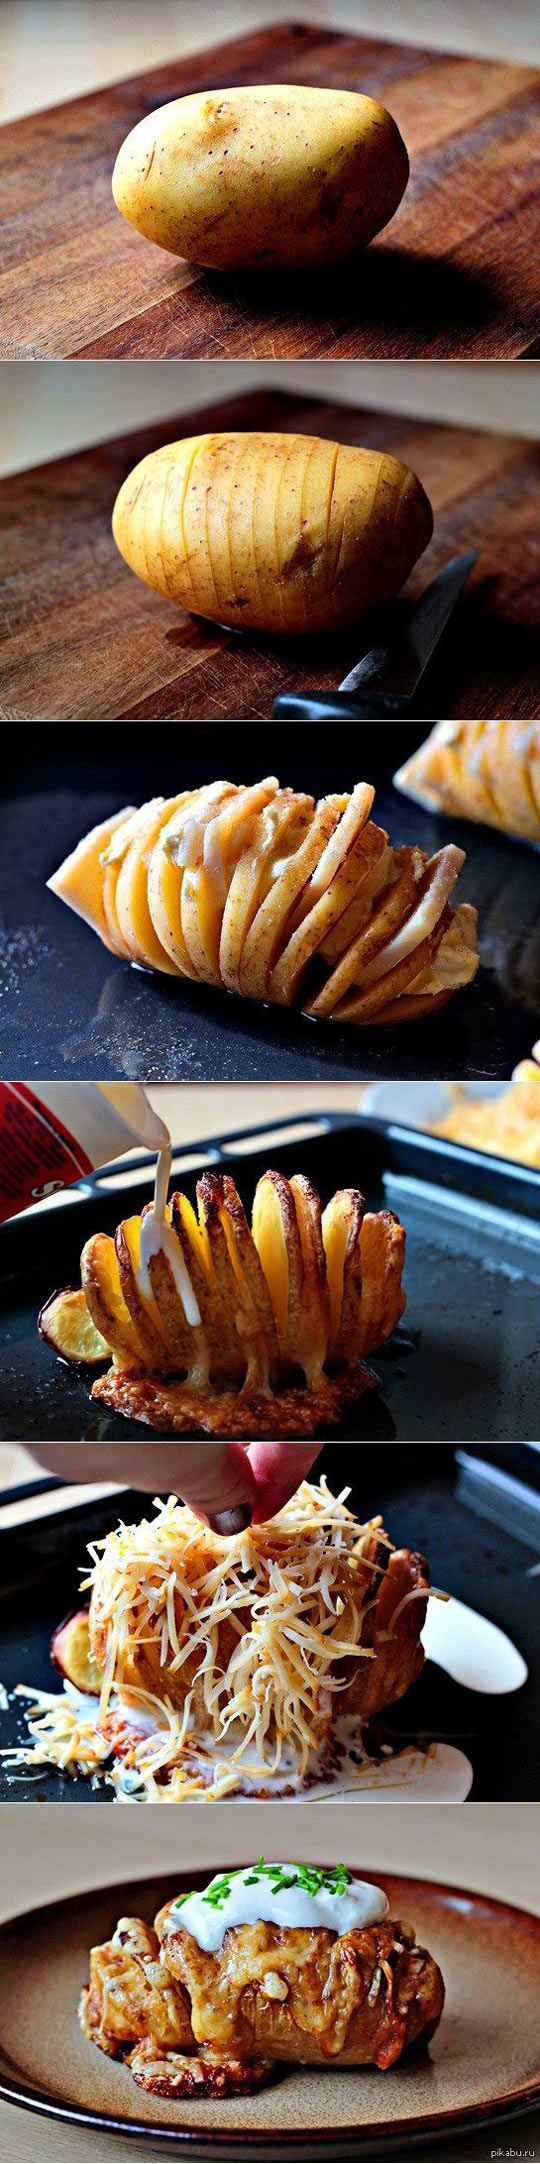 Definitely A Great Way To Make A Baked Potato